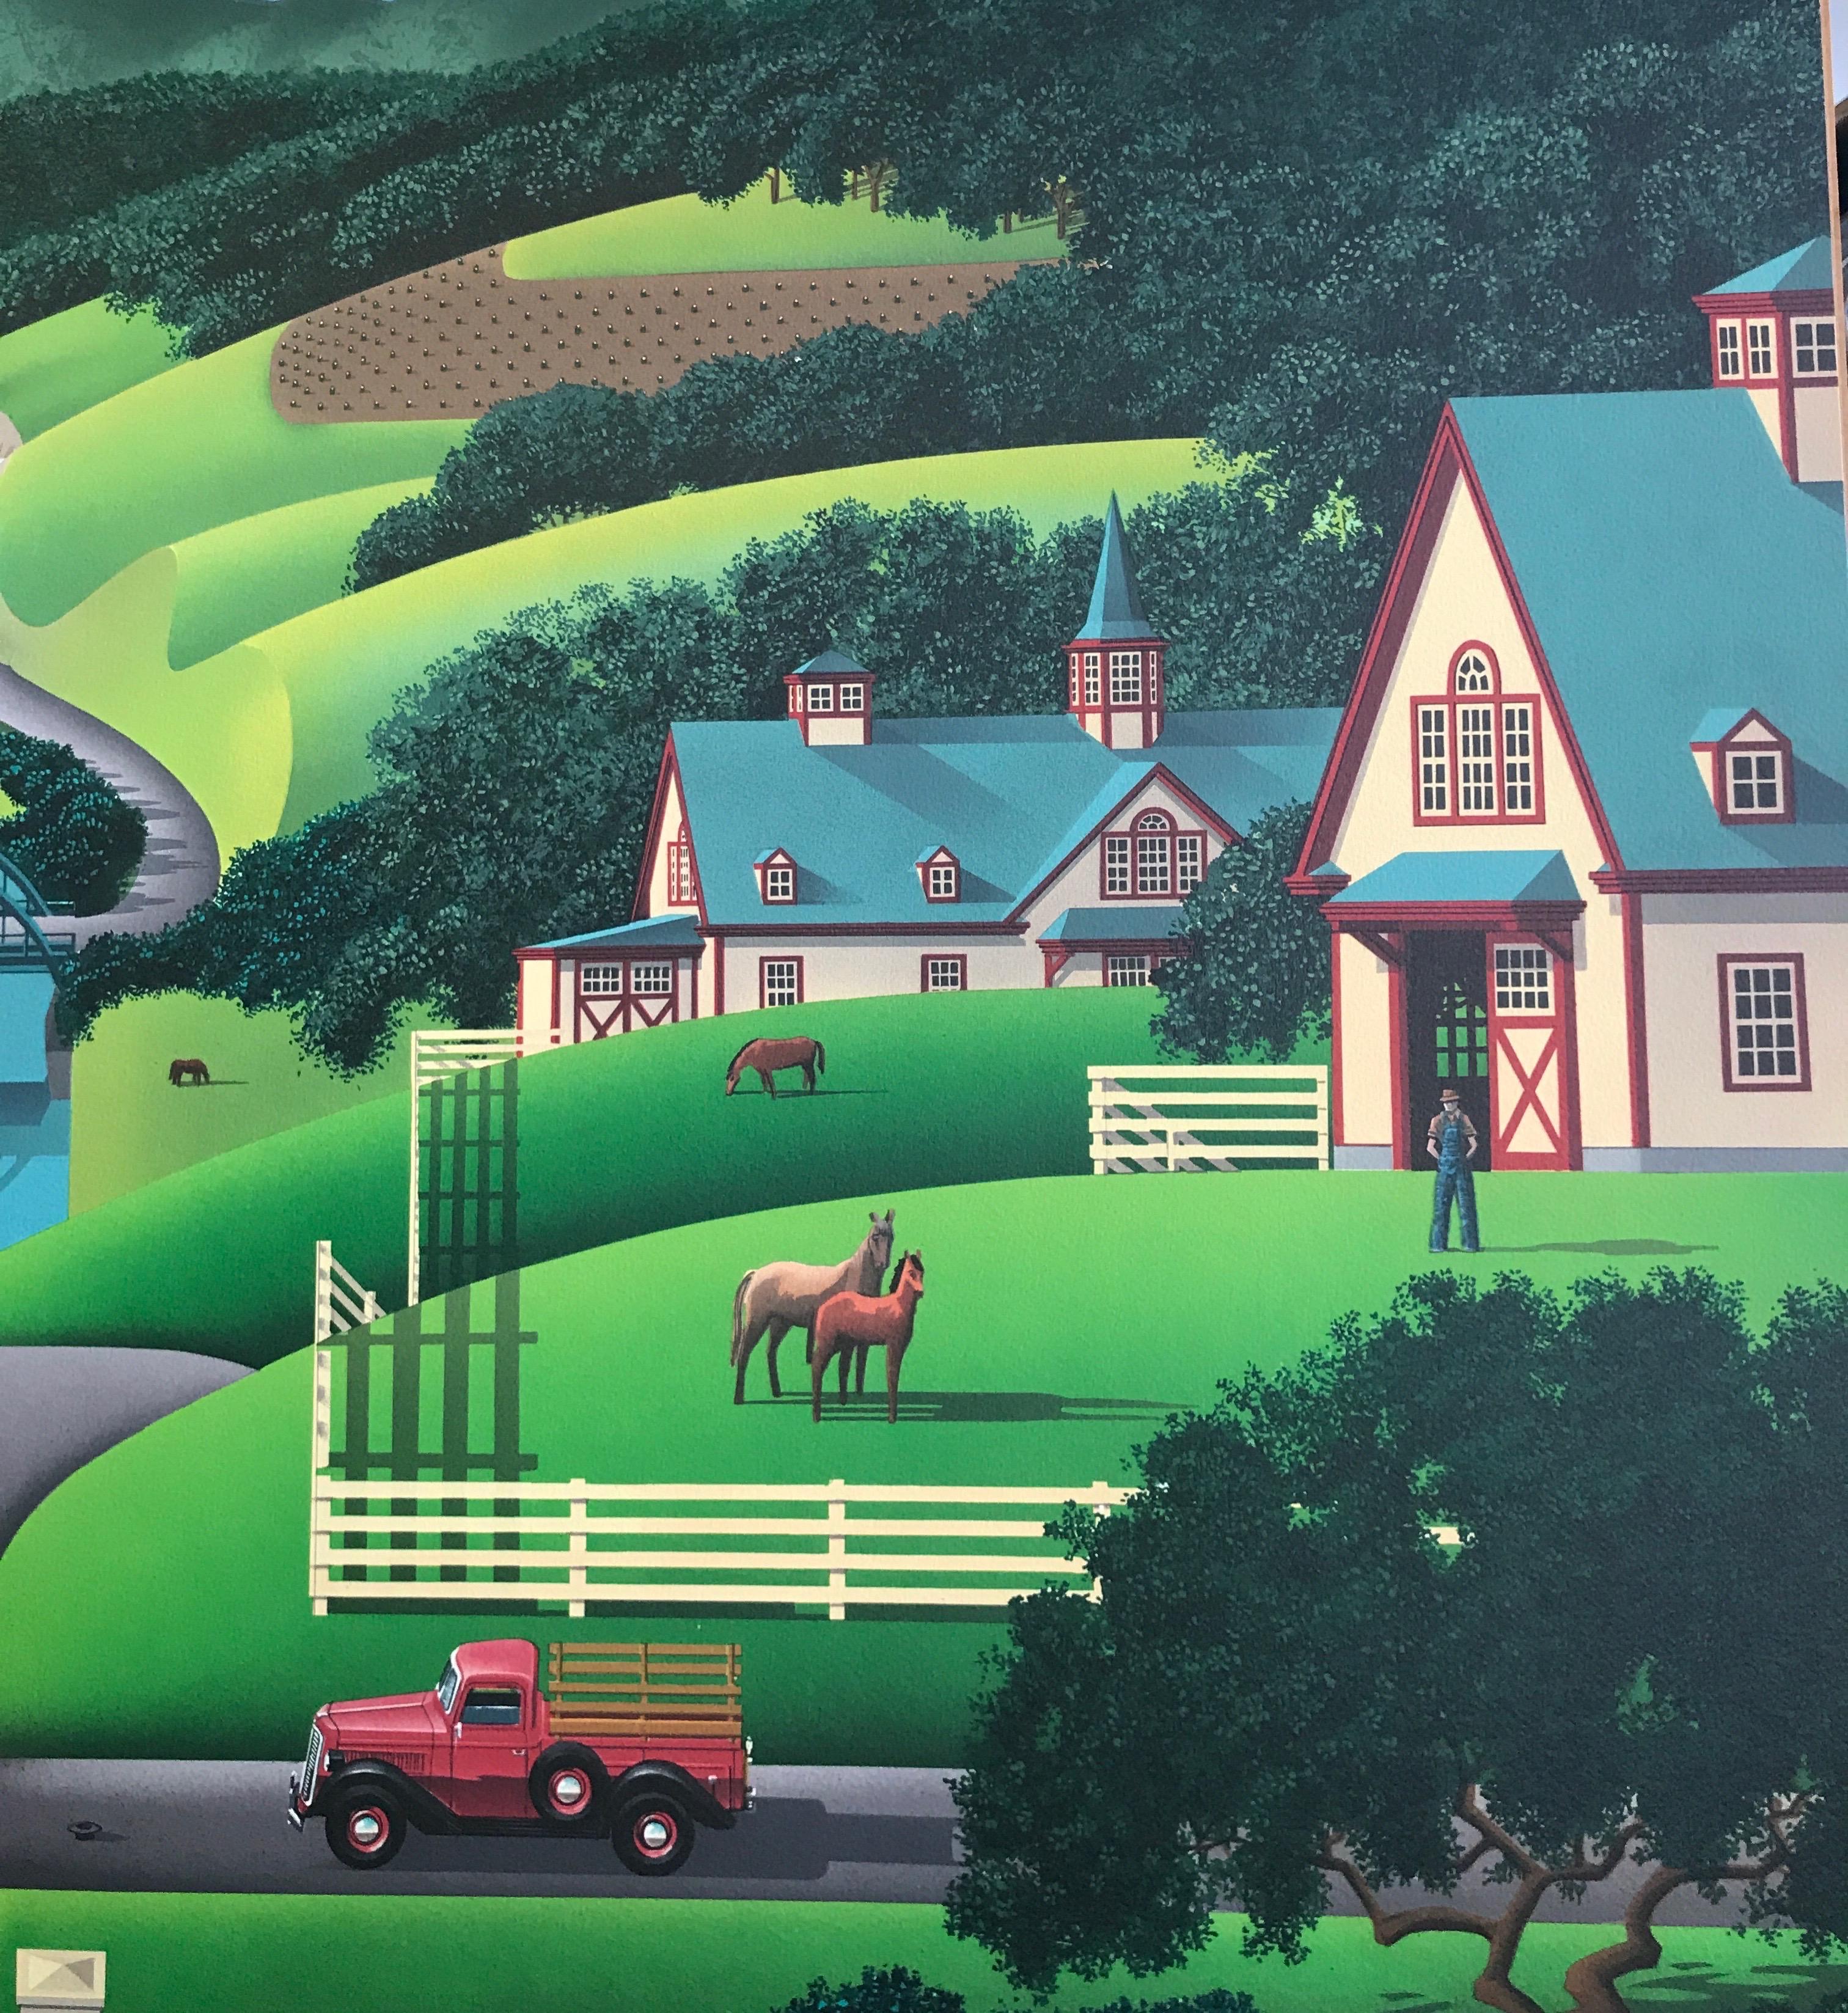 TROUBLE AT WALNUT RIDGE Signed Lithograph, Farm Country, Green Hills, Horses - Contemporary Print by Jim Buckels